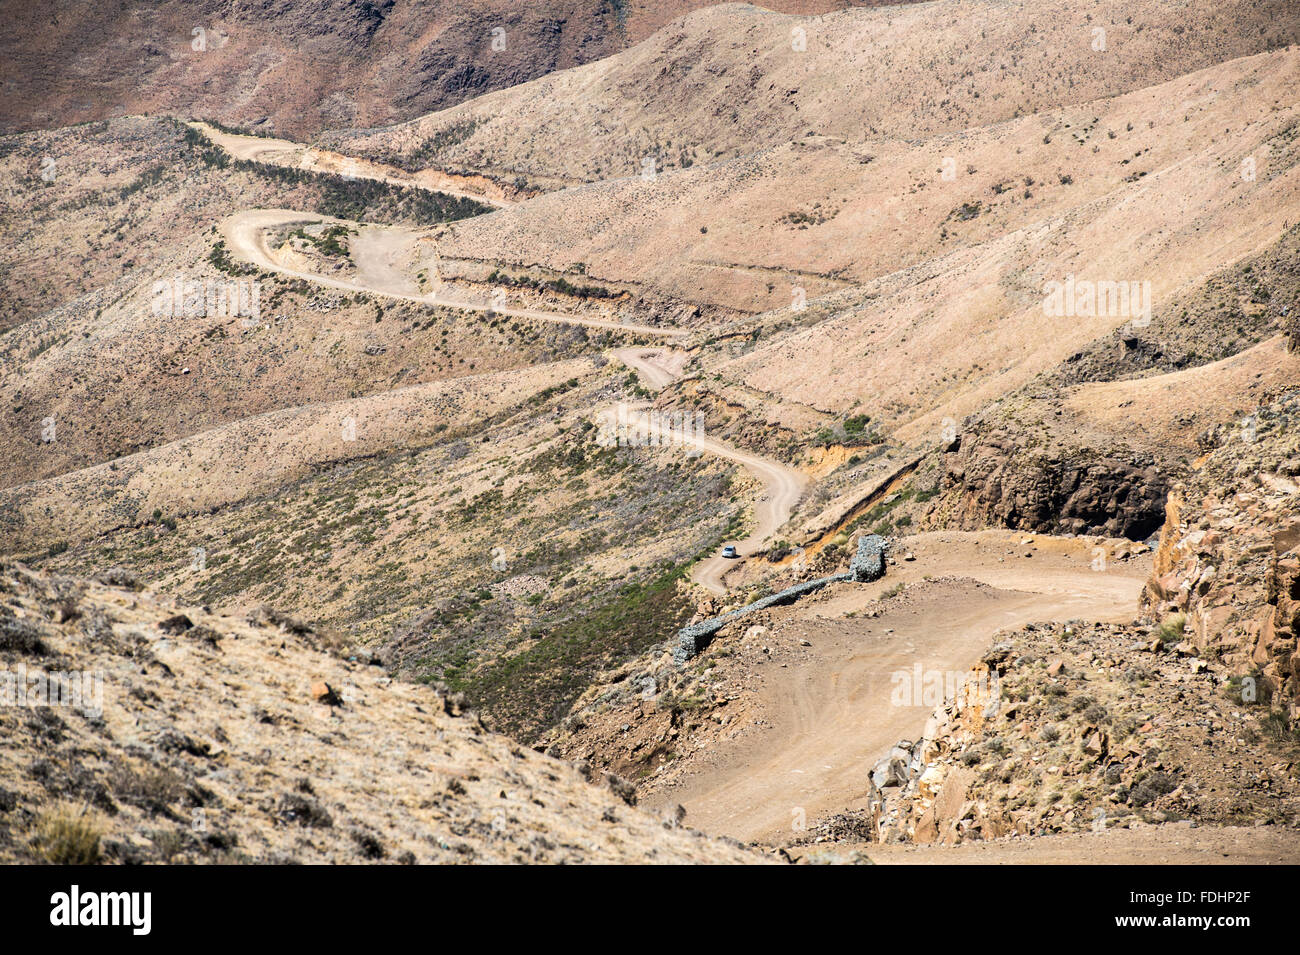 SUV driving down the winding road in the mountains of Lesotho, Africa Stock Photo